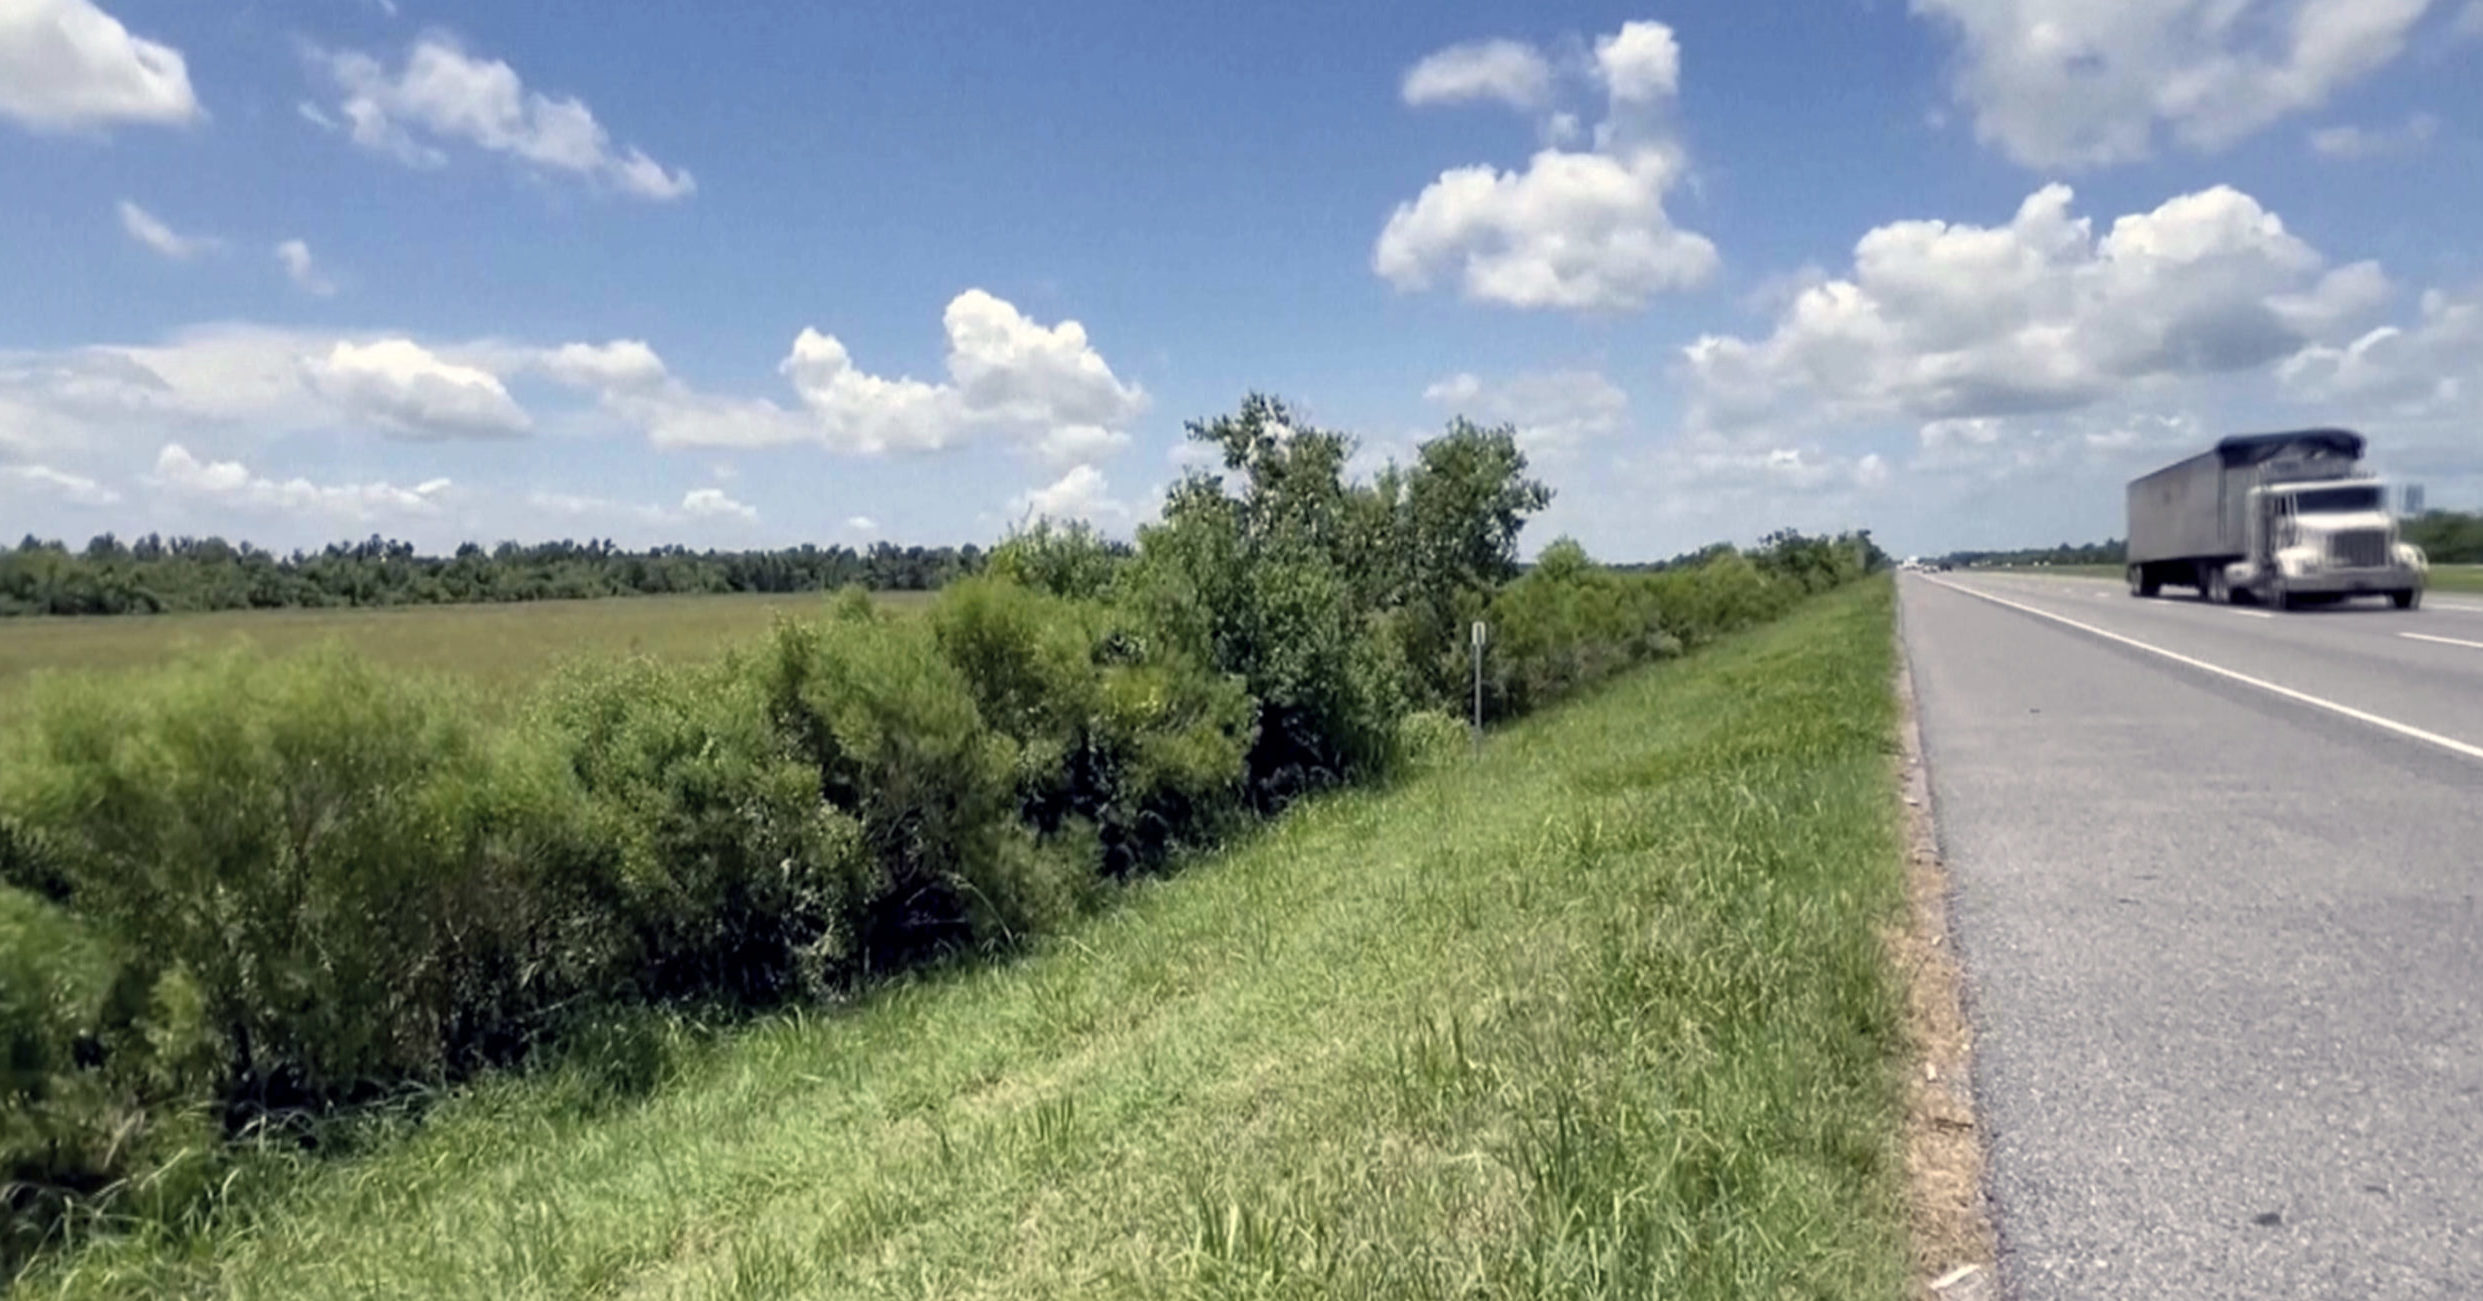 A shot from a video shows the area where a 1-year-old was found on Tuesday.